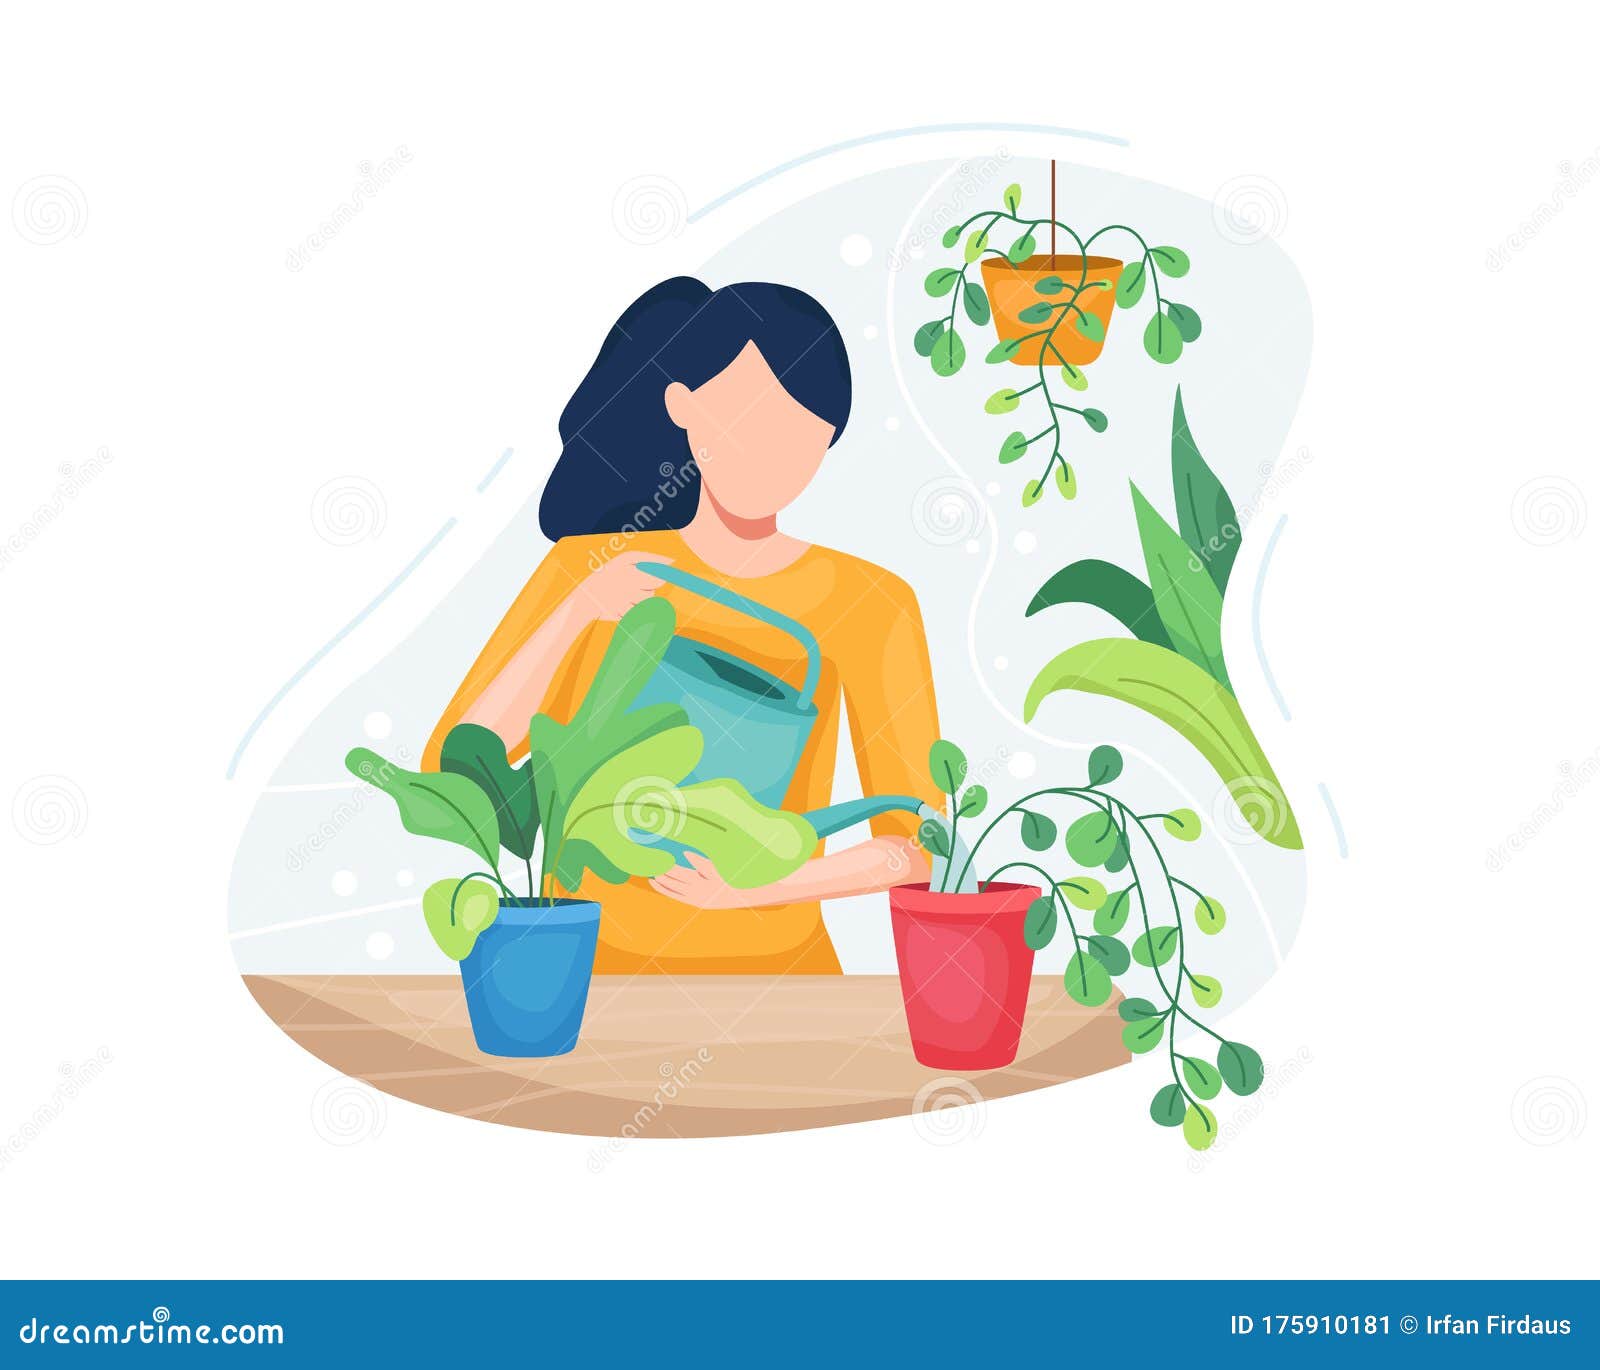 Taking care of plants clipart